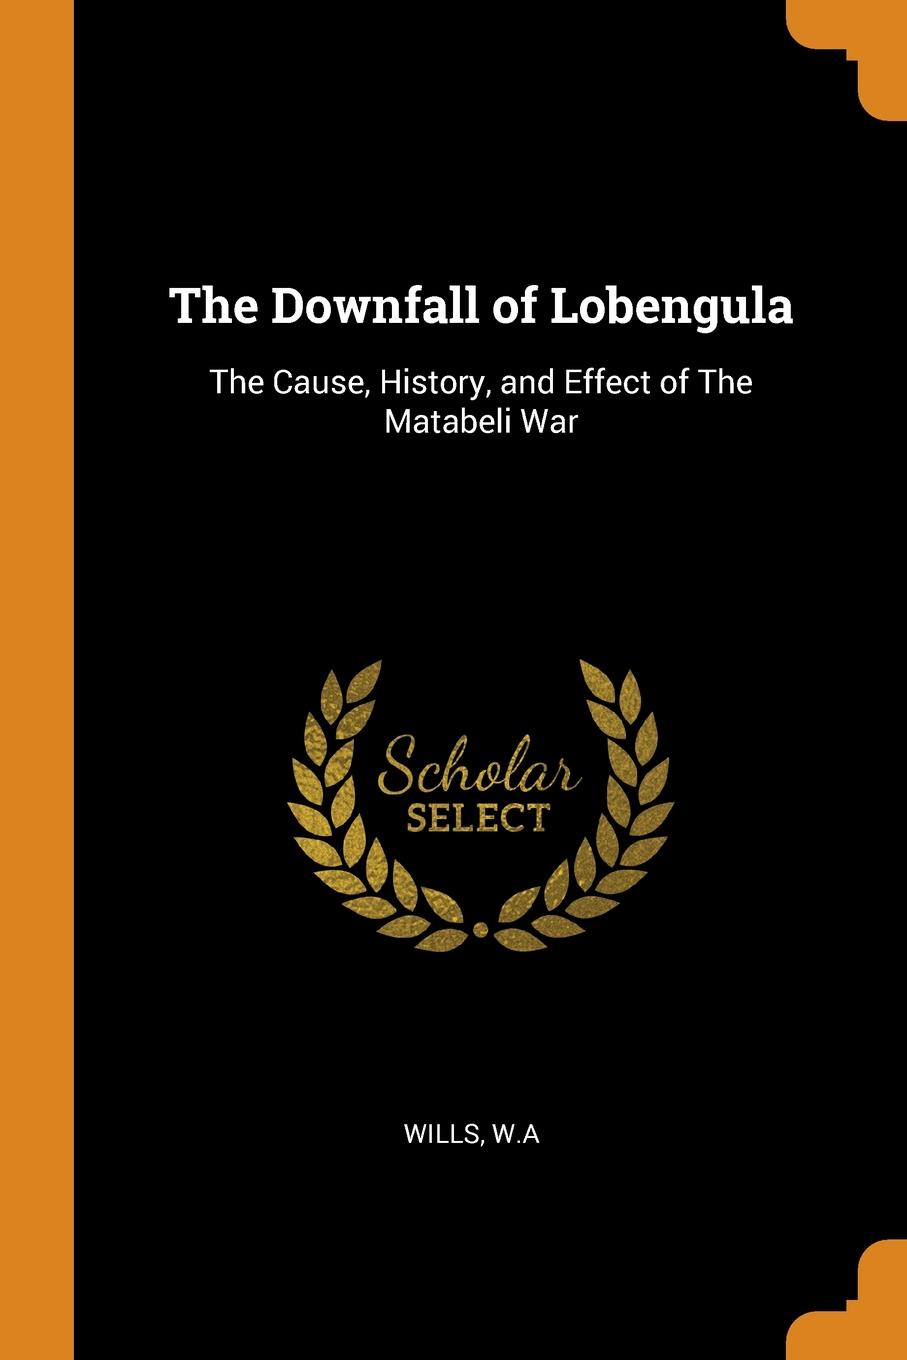 The Downfall of Lobengula. The Cause, History, and Effect of The Matabeli War